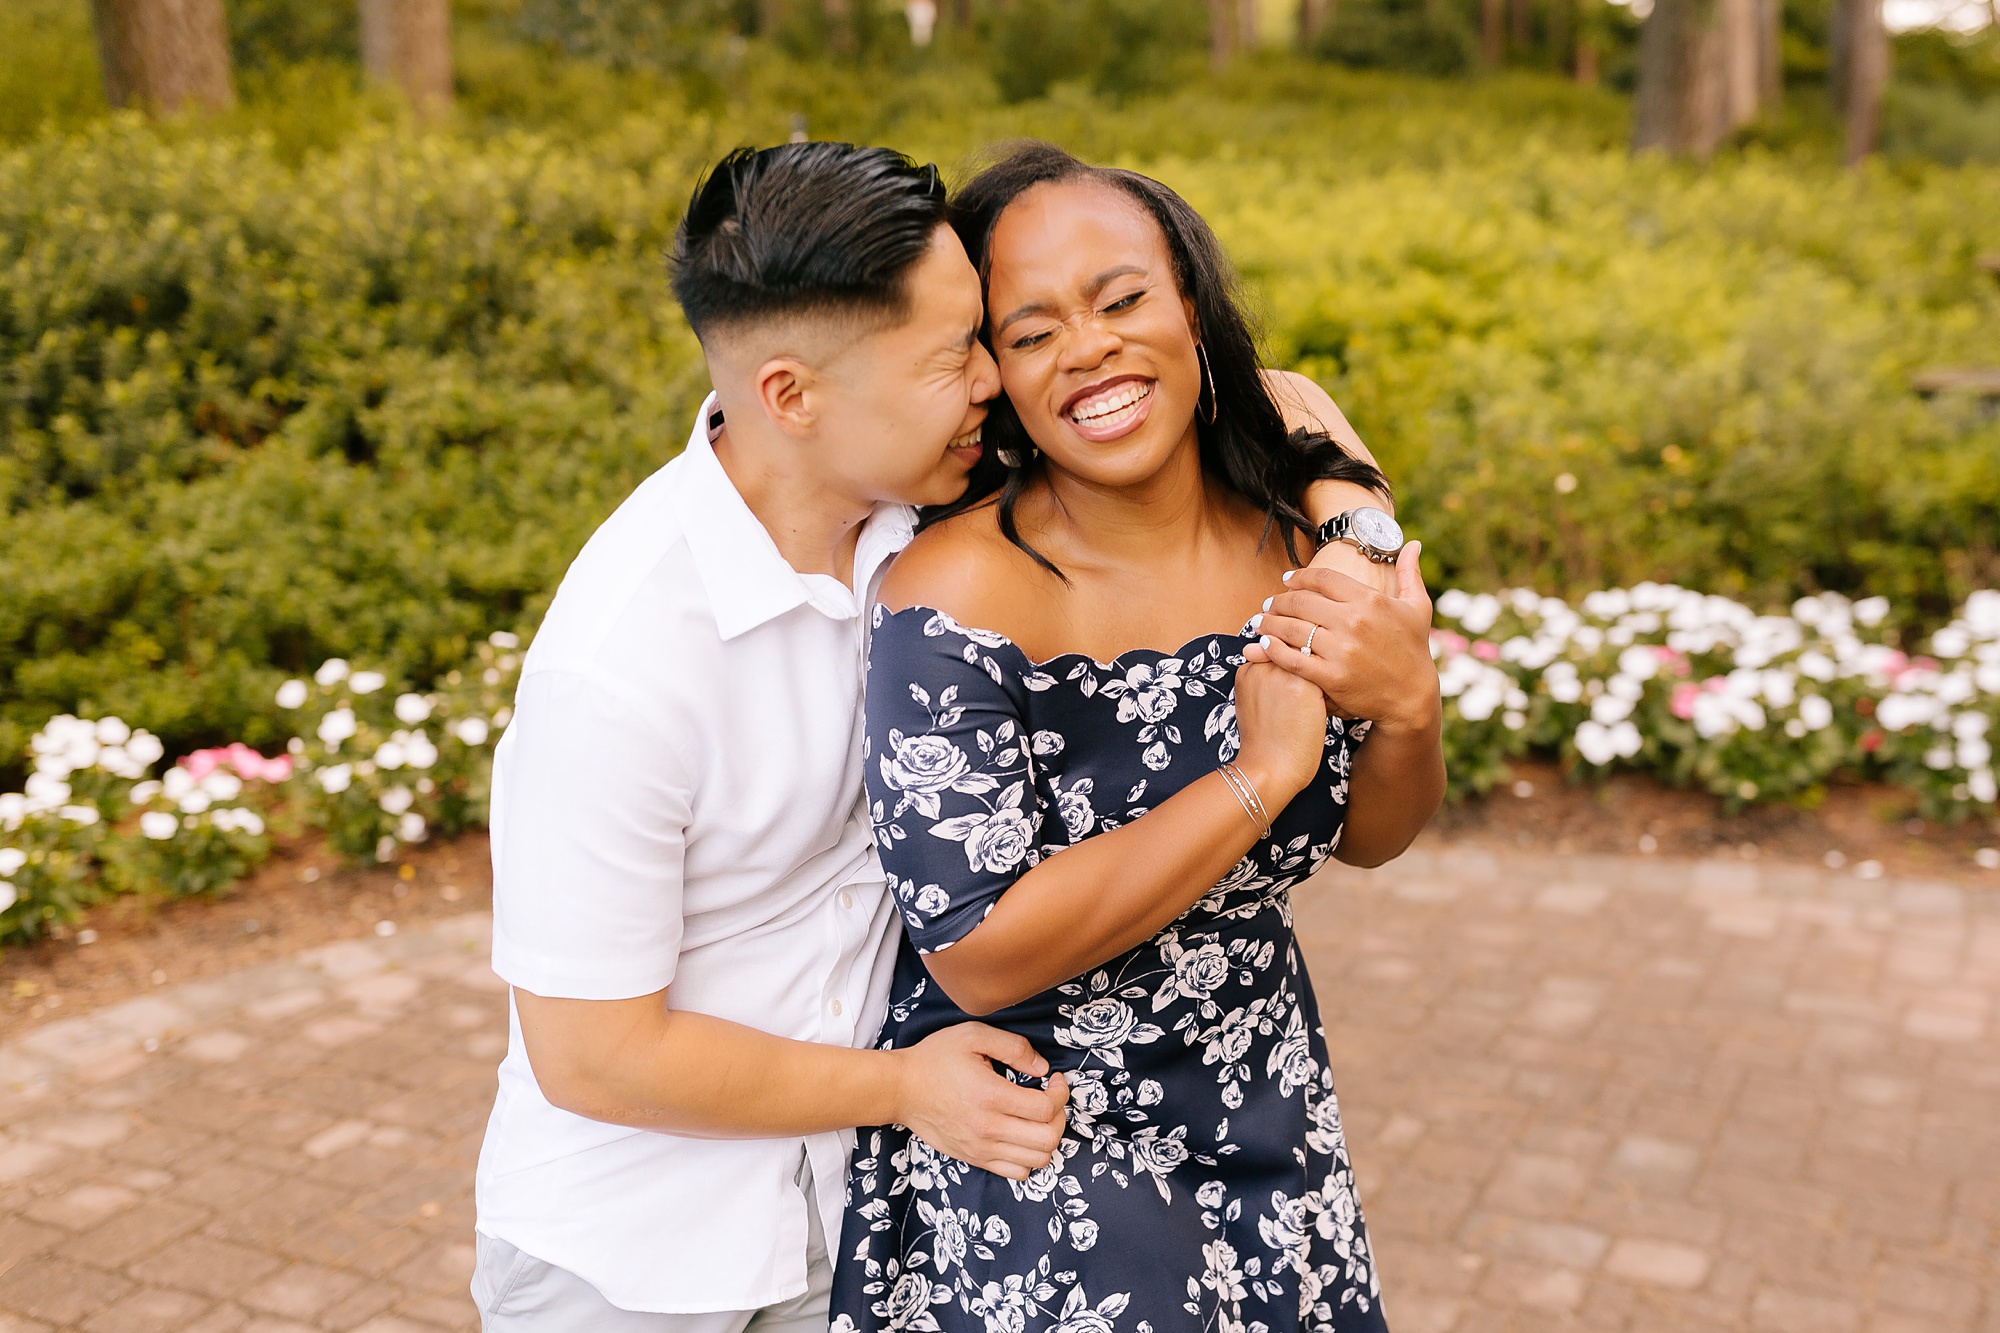 WRAL Gardens engagement session photographed by Chelsea Renay